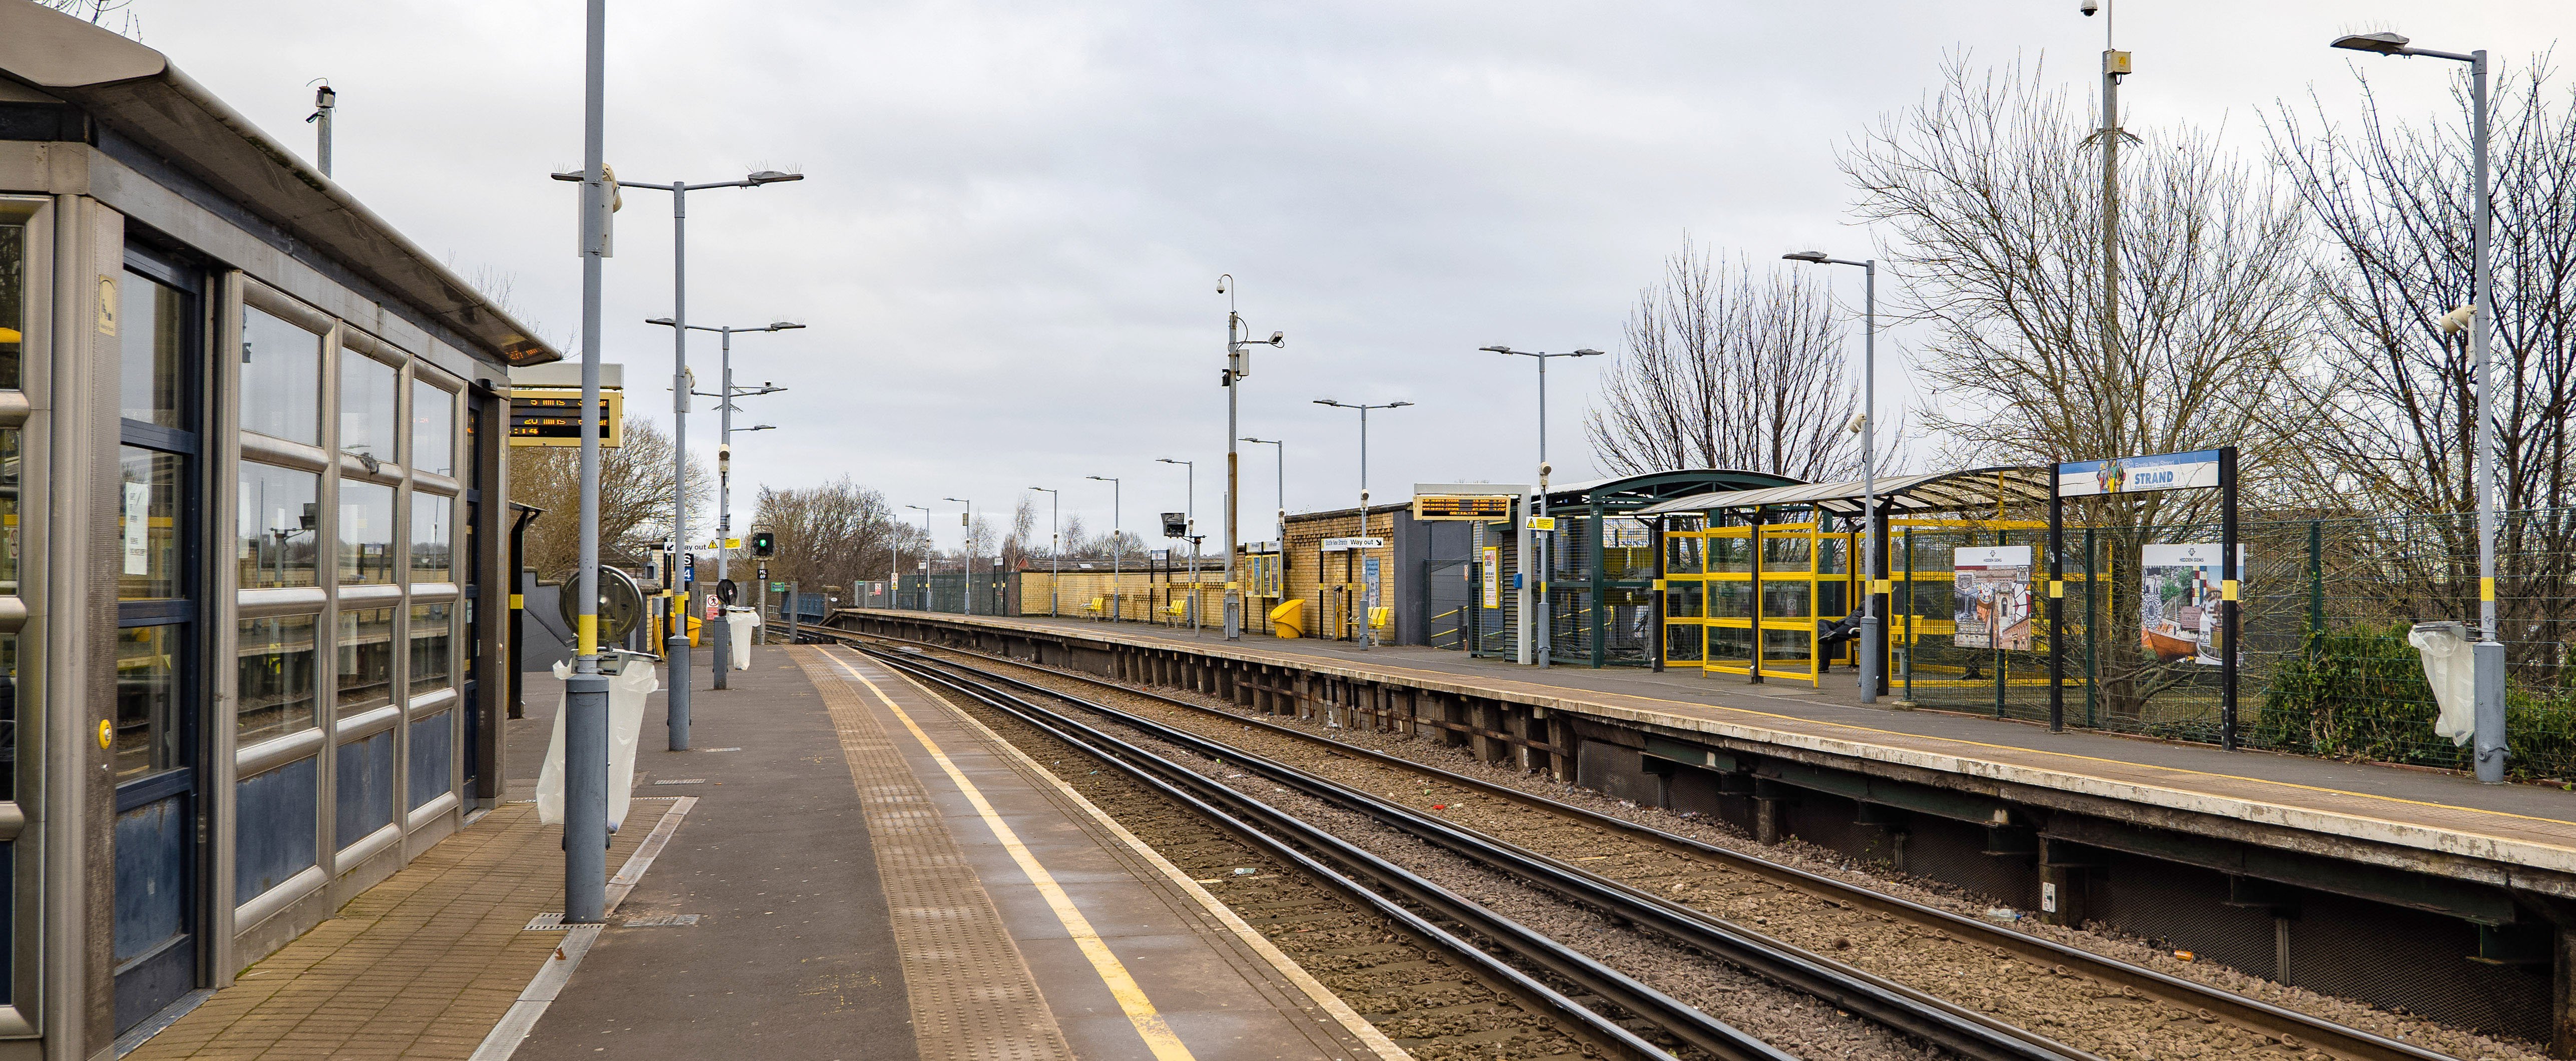 The platform at Bootle New Strand station. There are lampposts, sheltered seating and rubbish bins on the platform. 